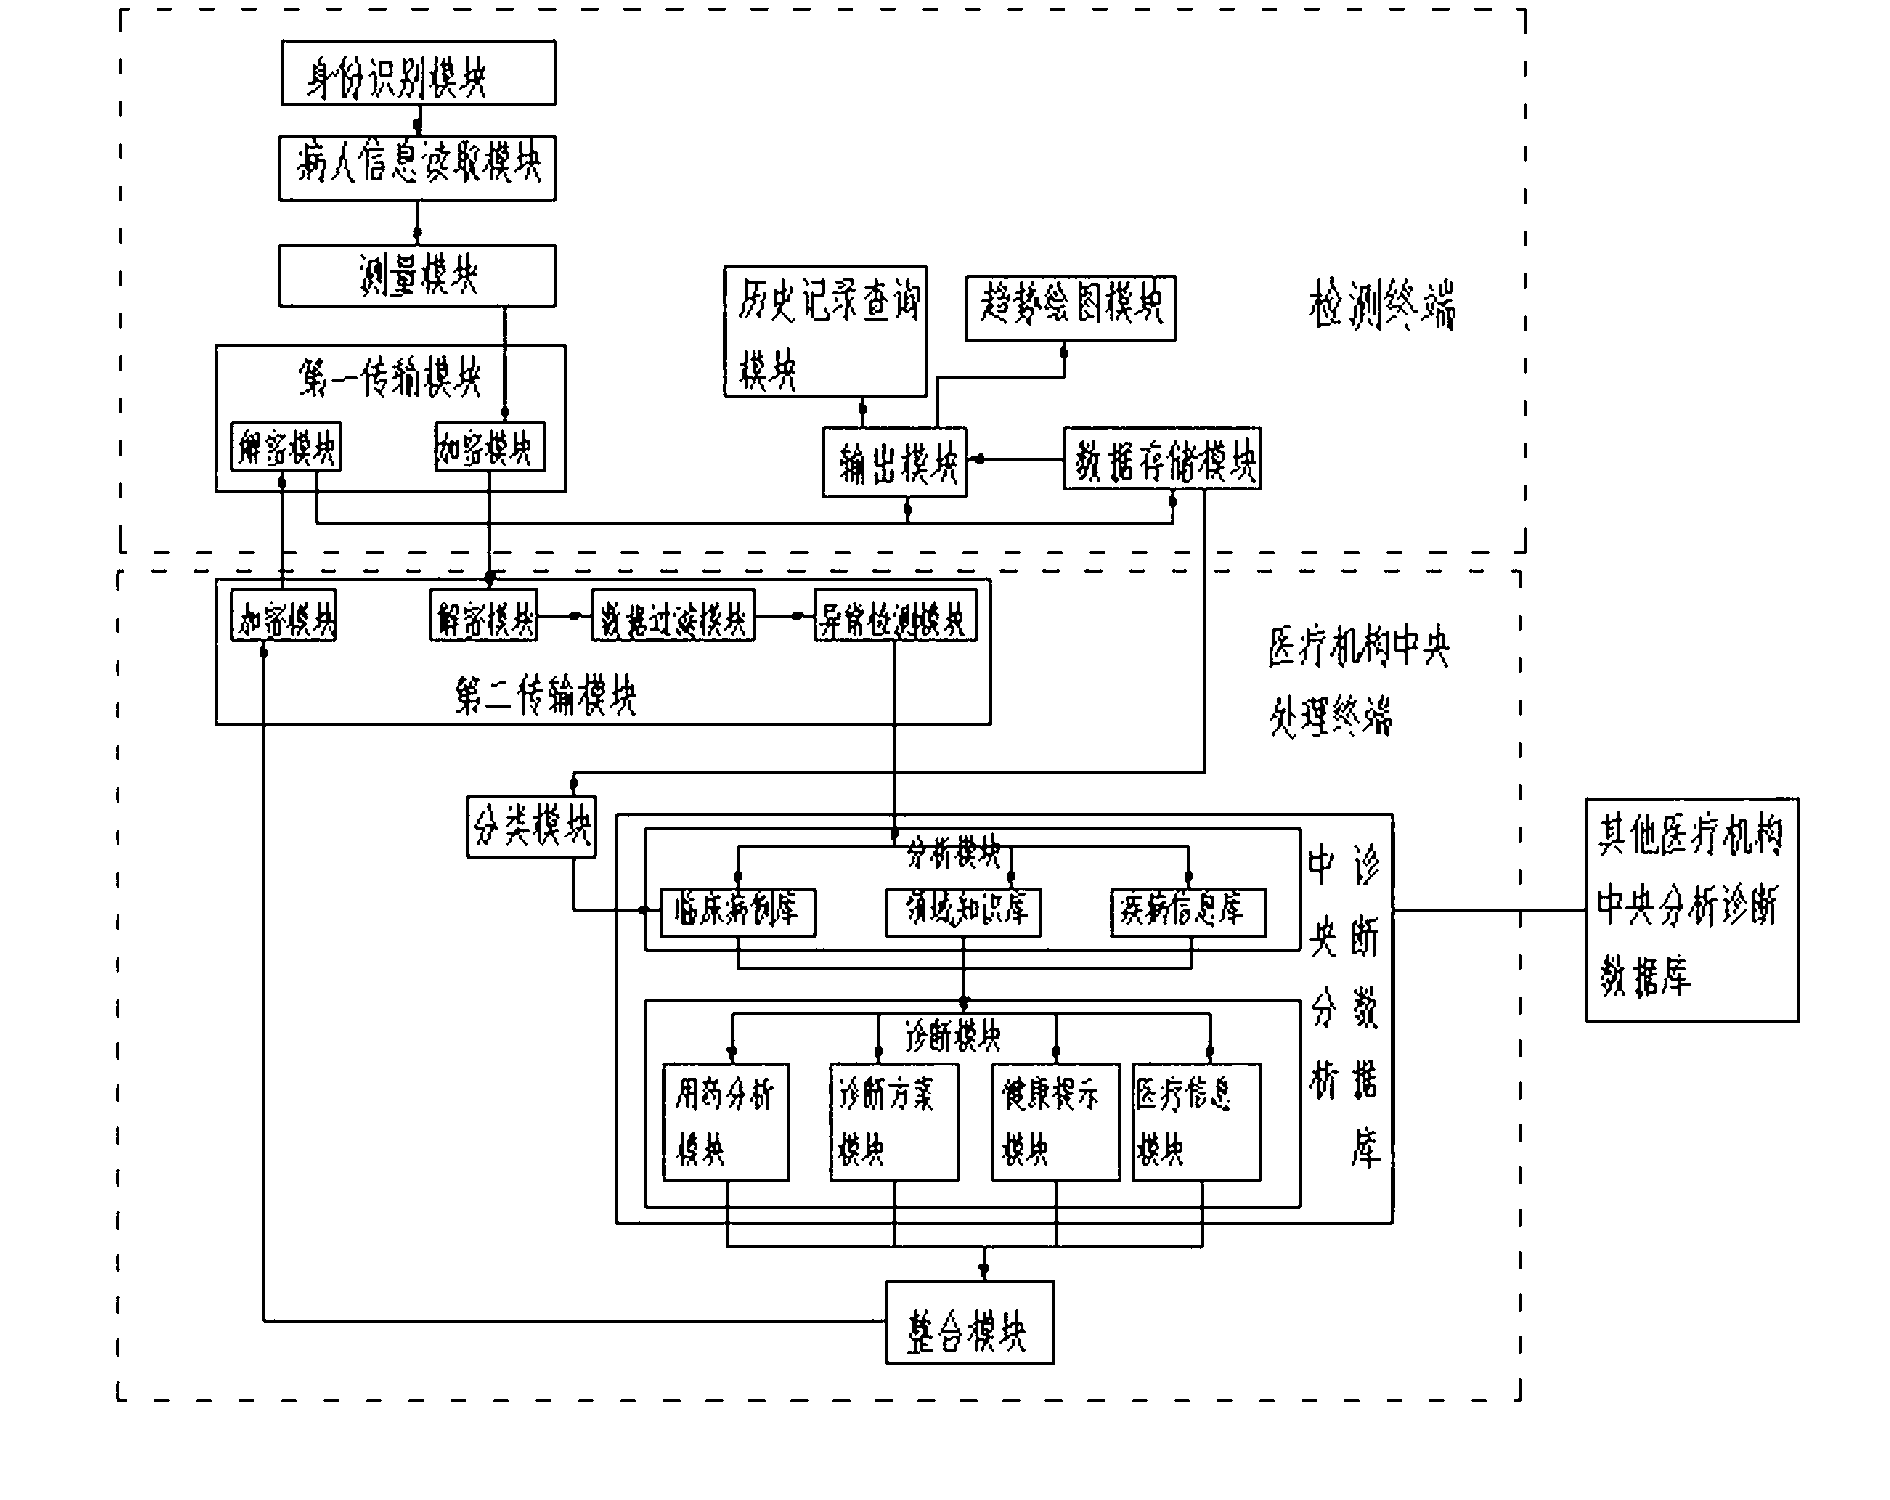 Multi-user multi-parameter wireless detection, diagnosis, service and monitoring system